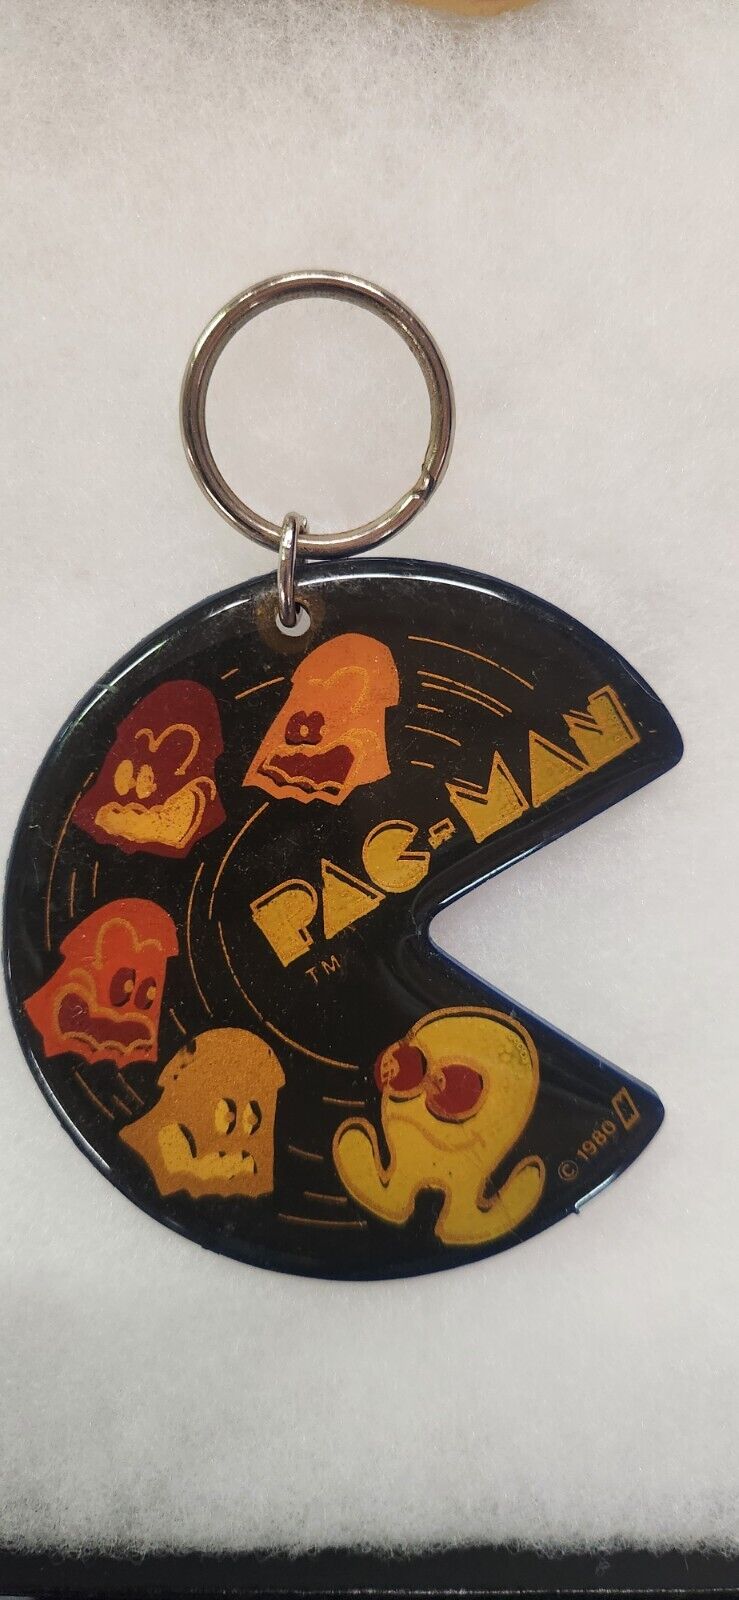 HUGE RARE BLACK 1970s Vintage Pac Man Ghost Keychain Novelty Arcade Collectible